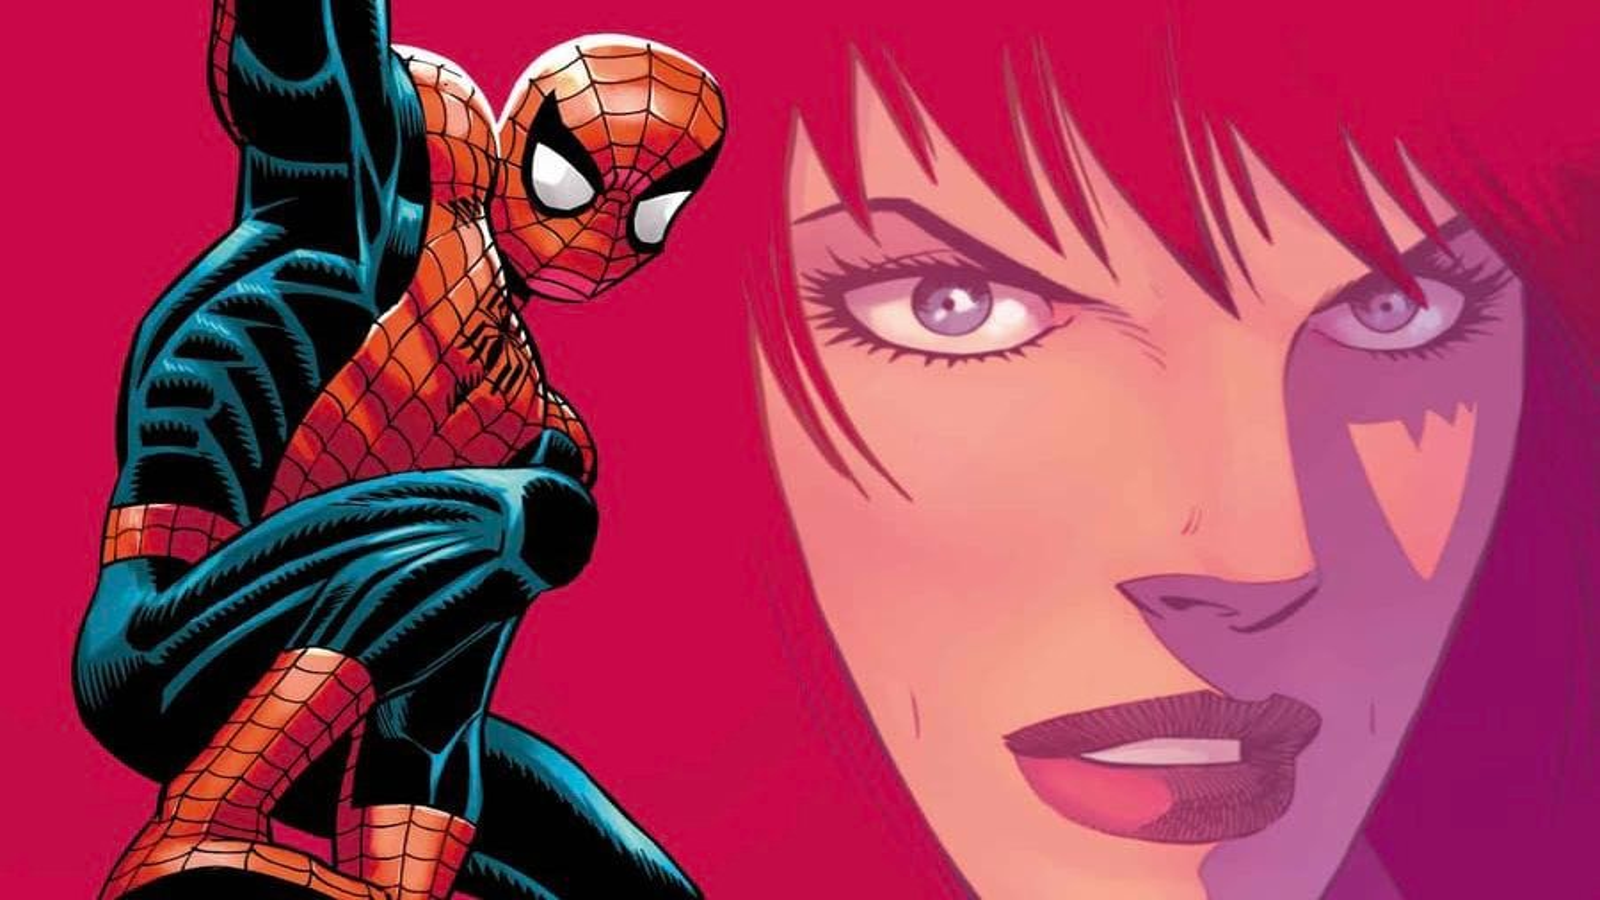 The Comics You Must Grab After Seeing The Amazing Spider-Man 2